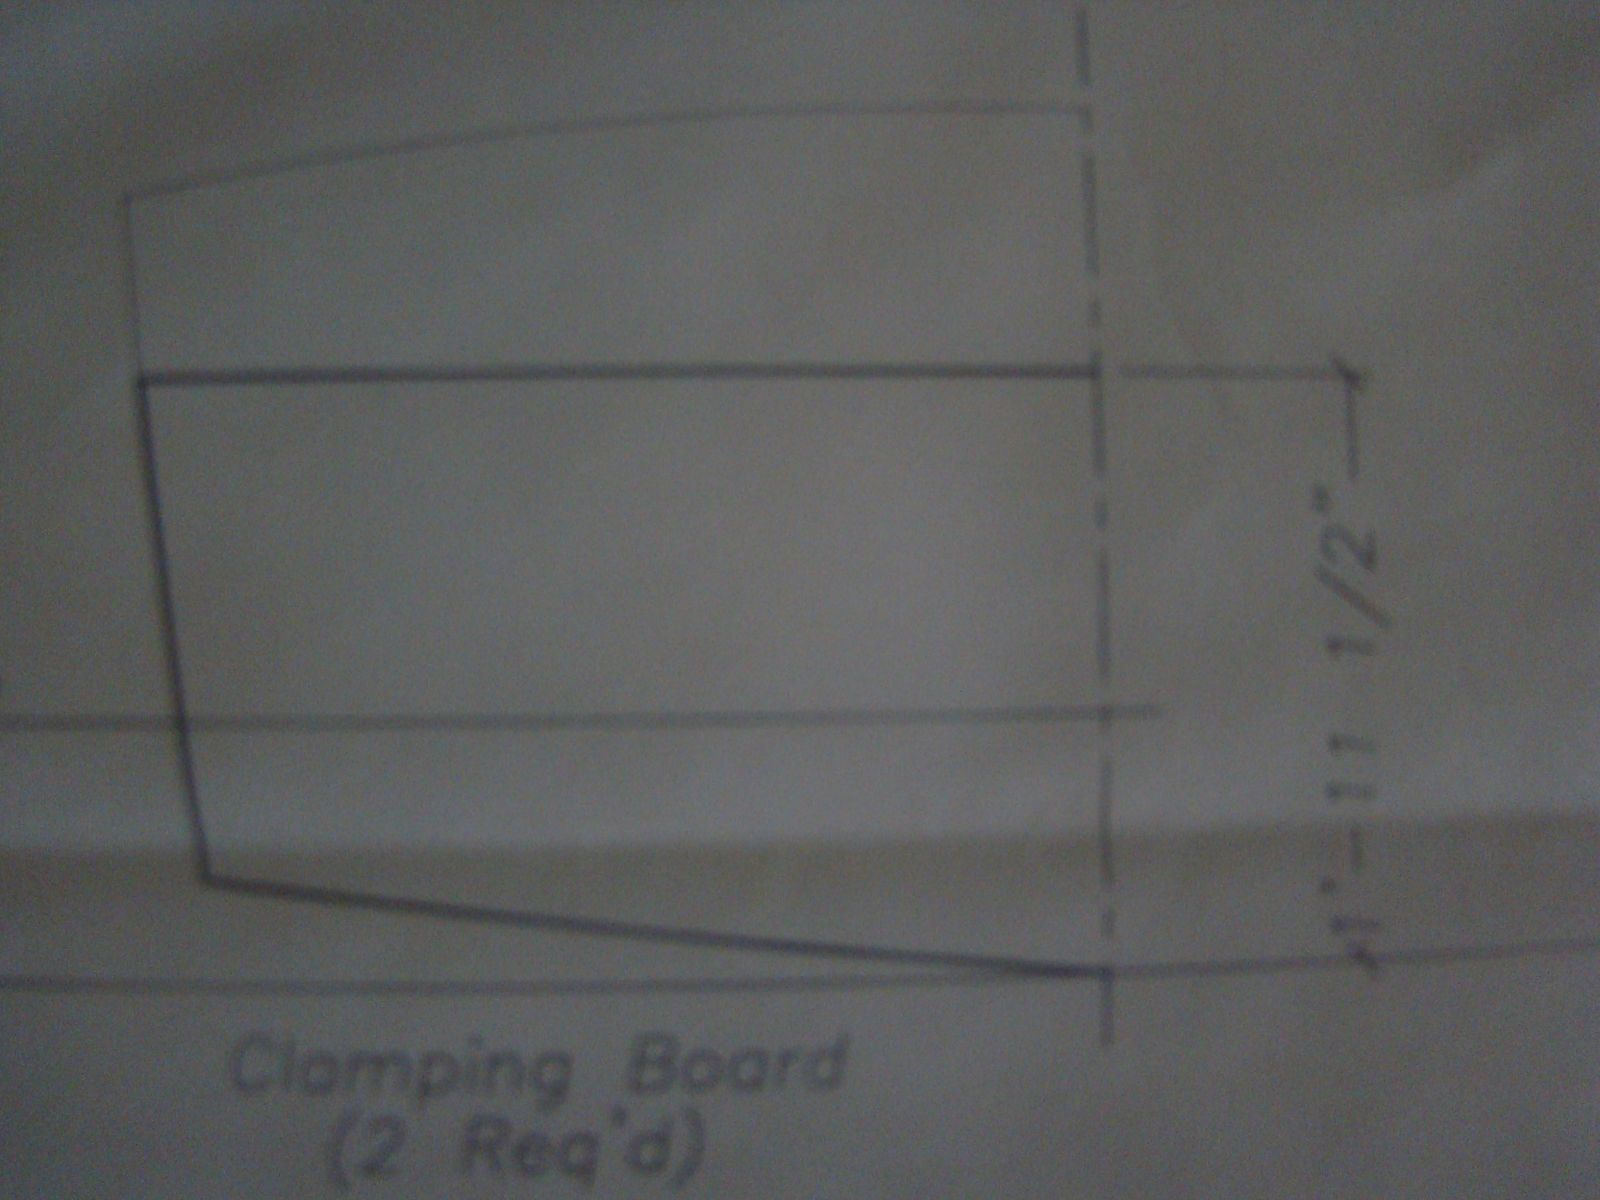 Clamping Board Plans
